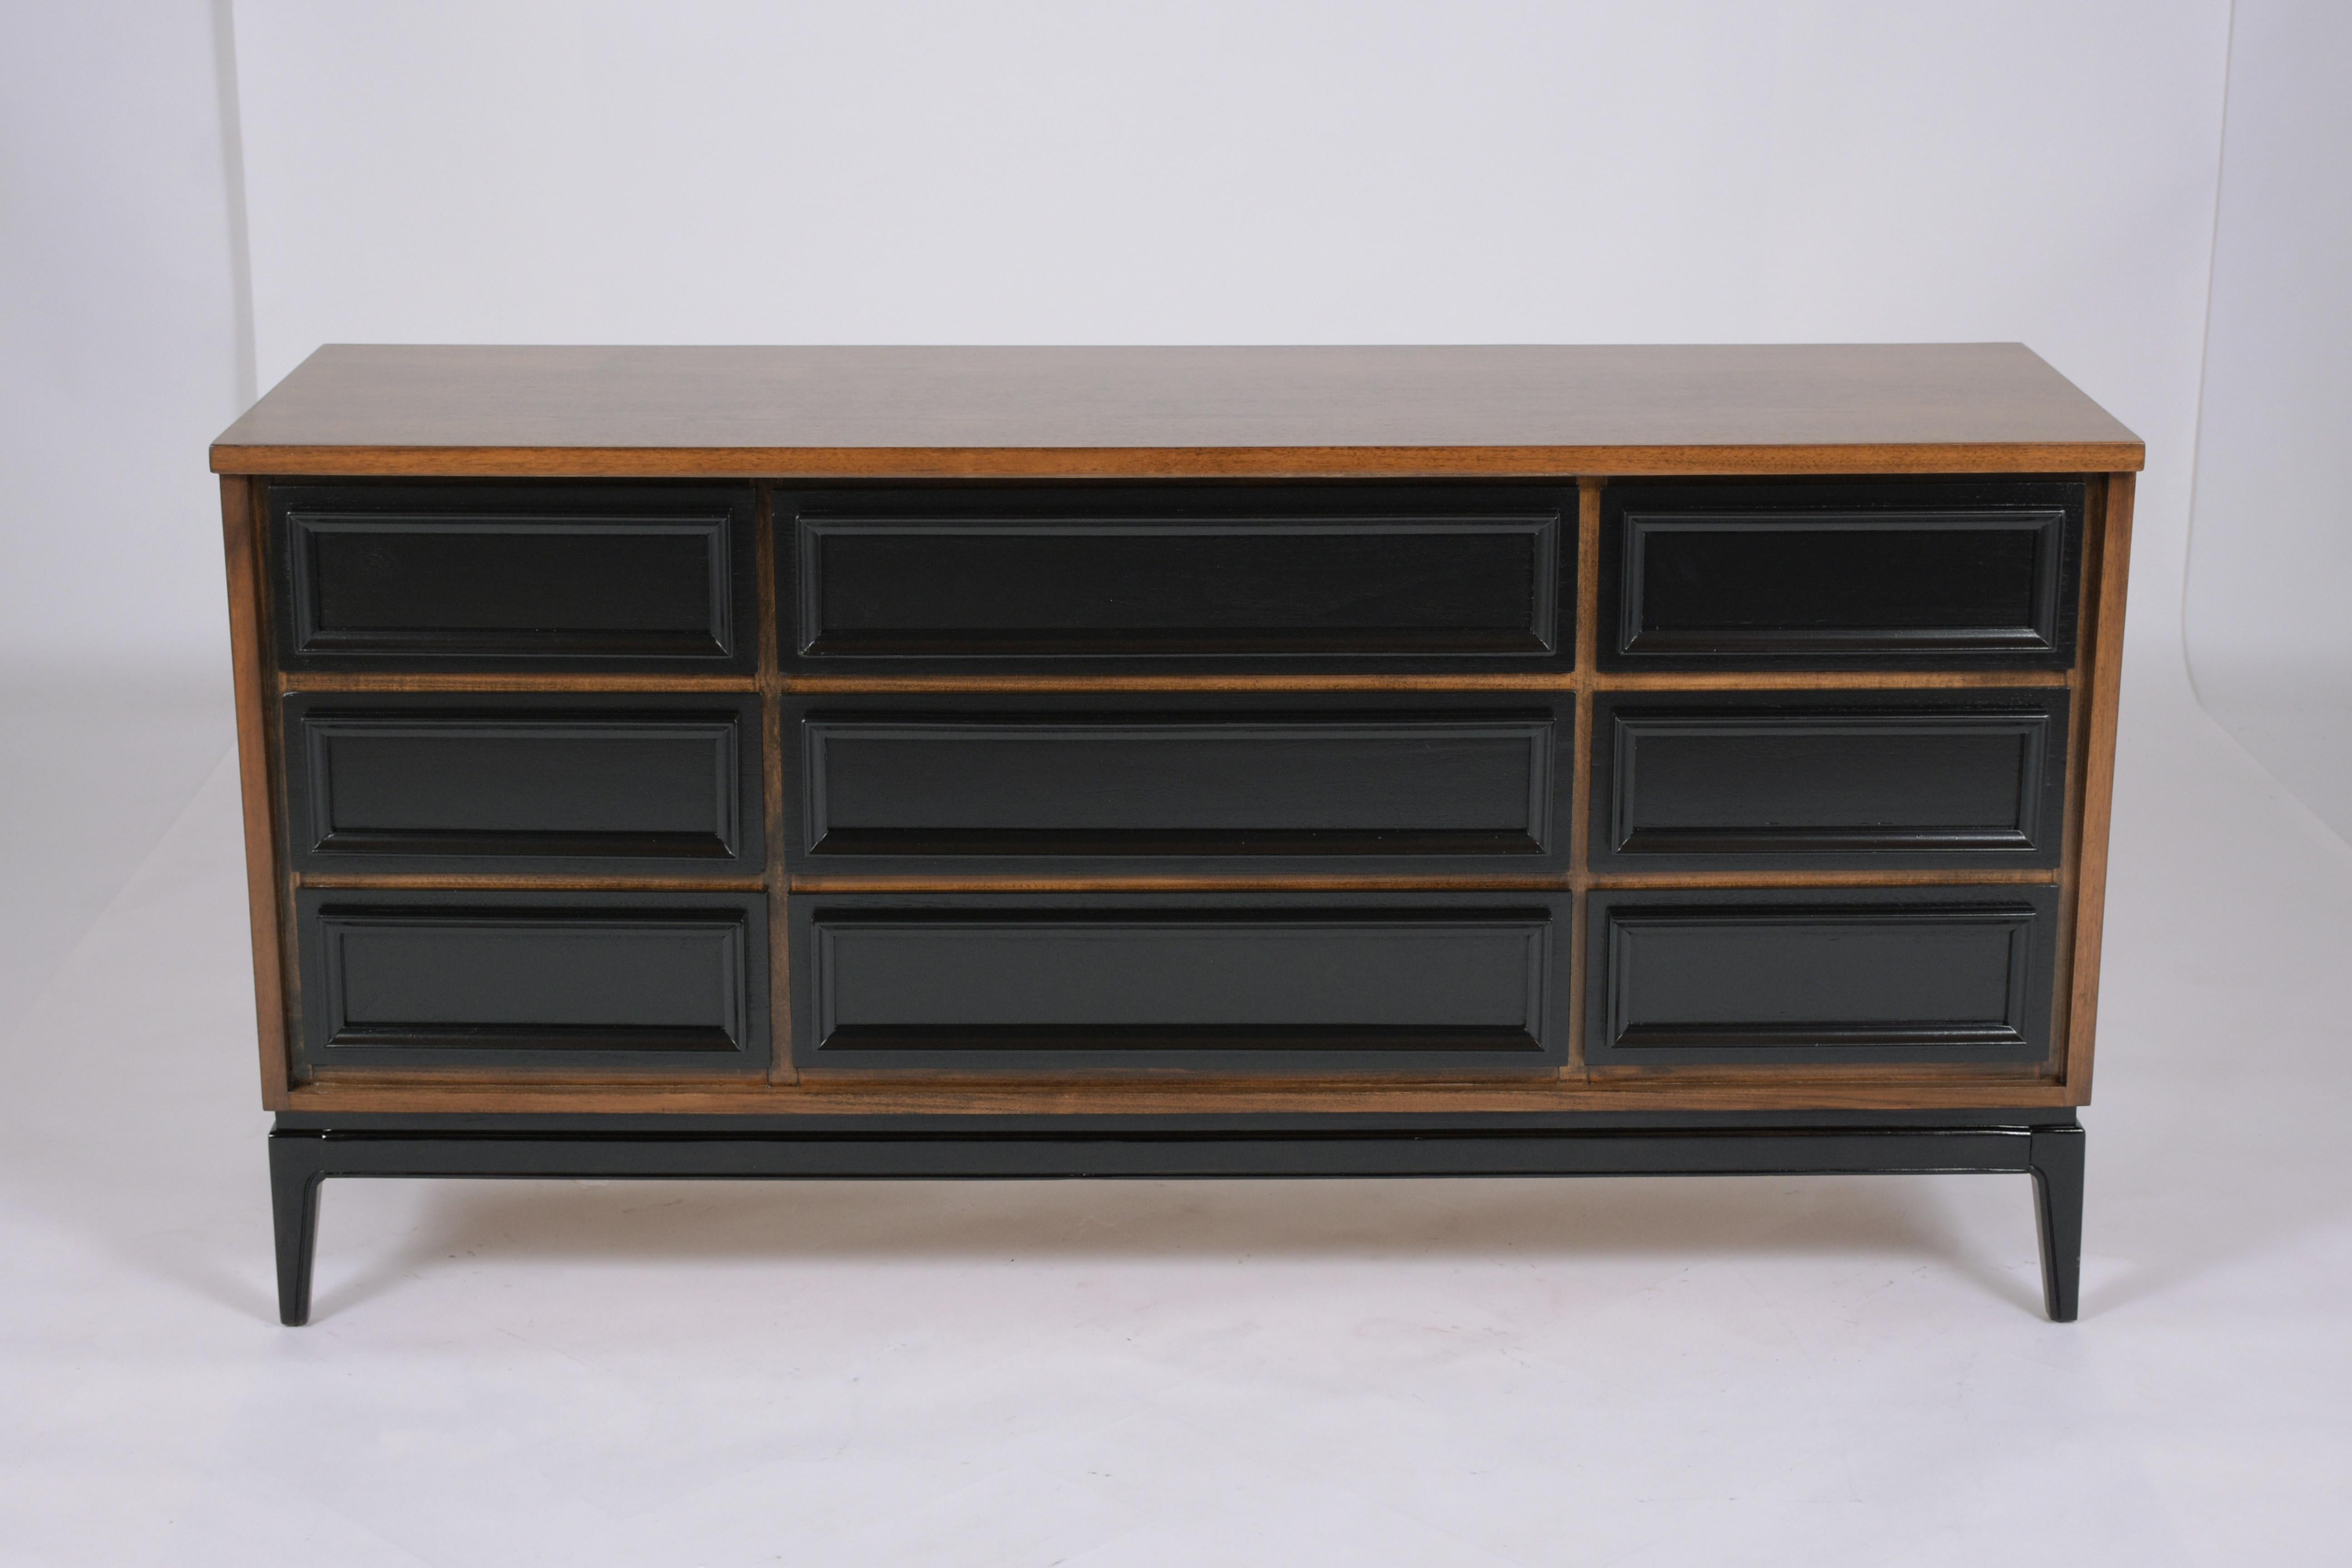 An extraordinary mid-century modern dresser hand-crafted out of wood in an excellent condition completely restored and refinished by our craftsmen team. This dresser is eye-catching featuring a great ebonized and dark walnut color combination with